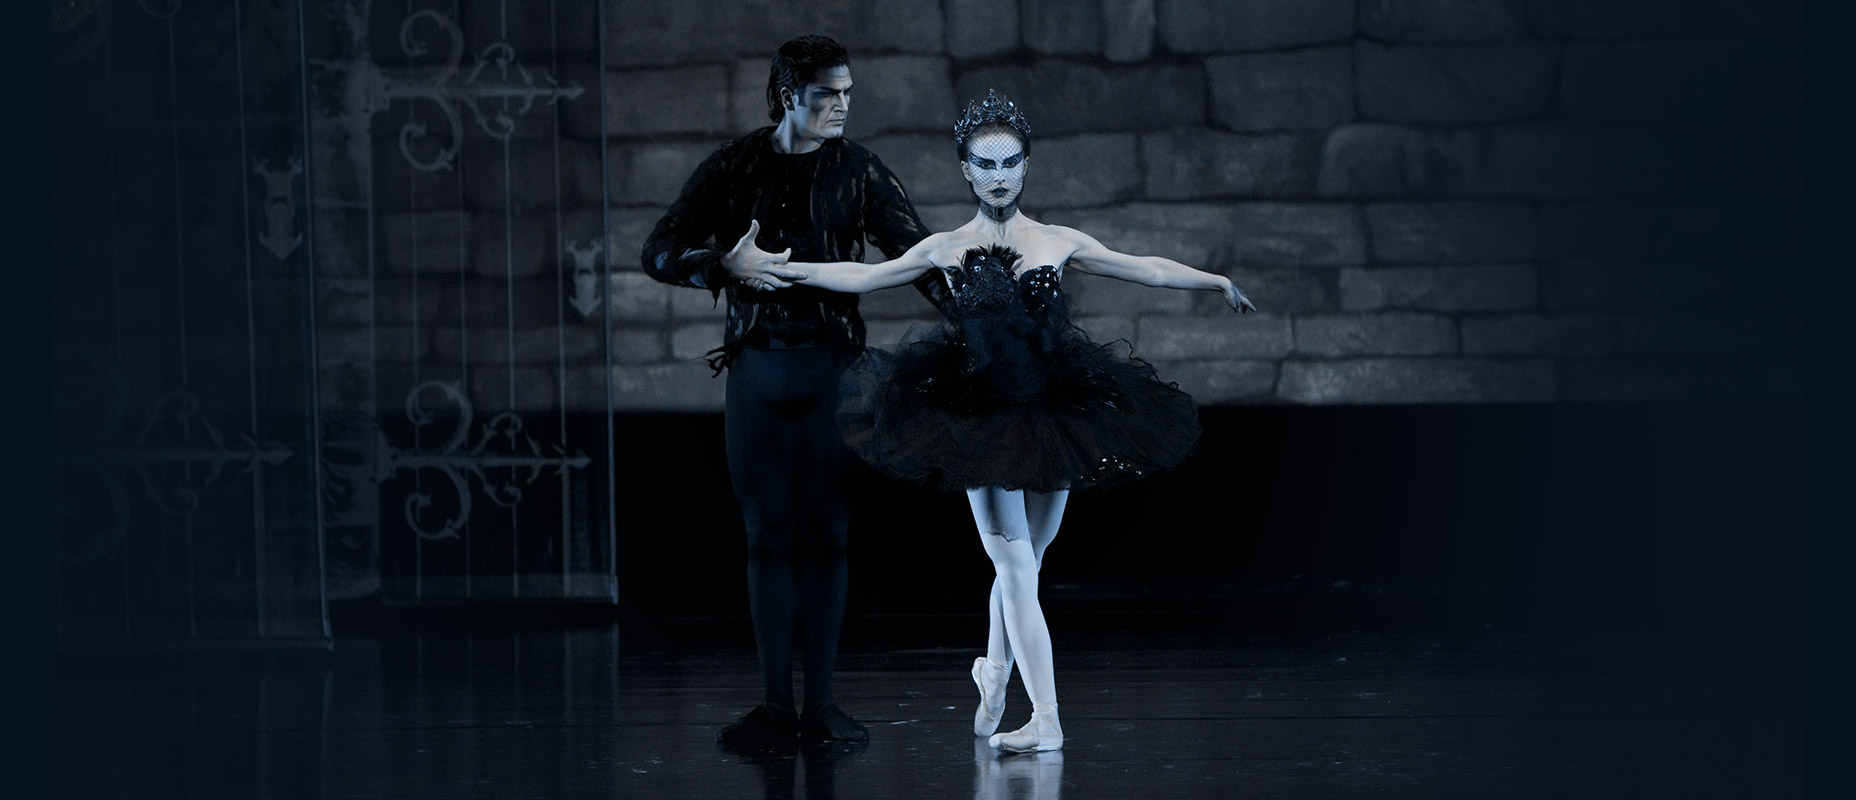 What Is a Black Swan Event and How Does It Impact Stock Markets?